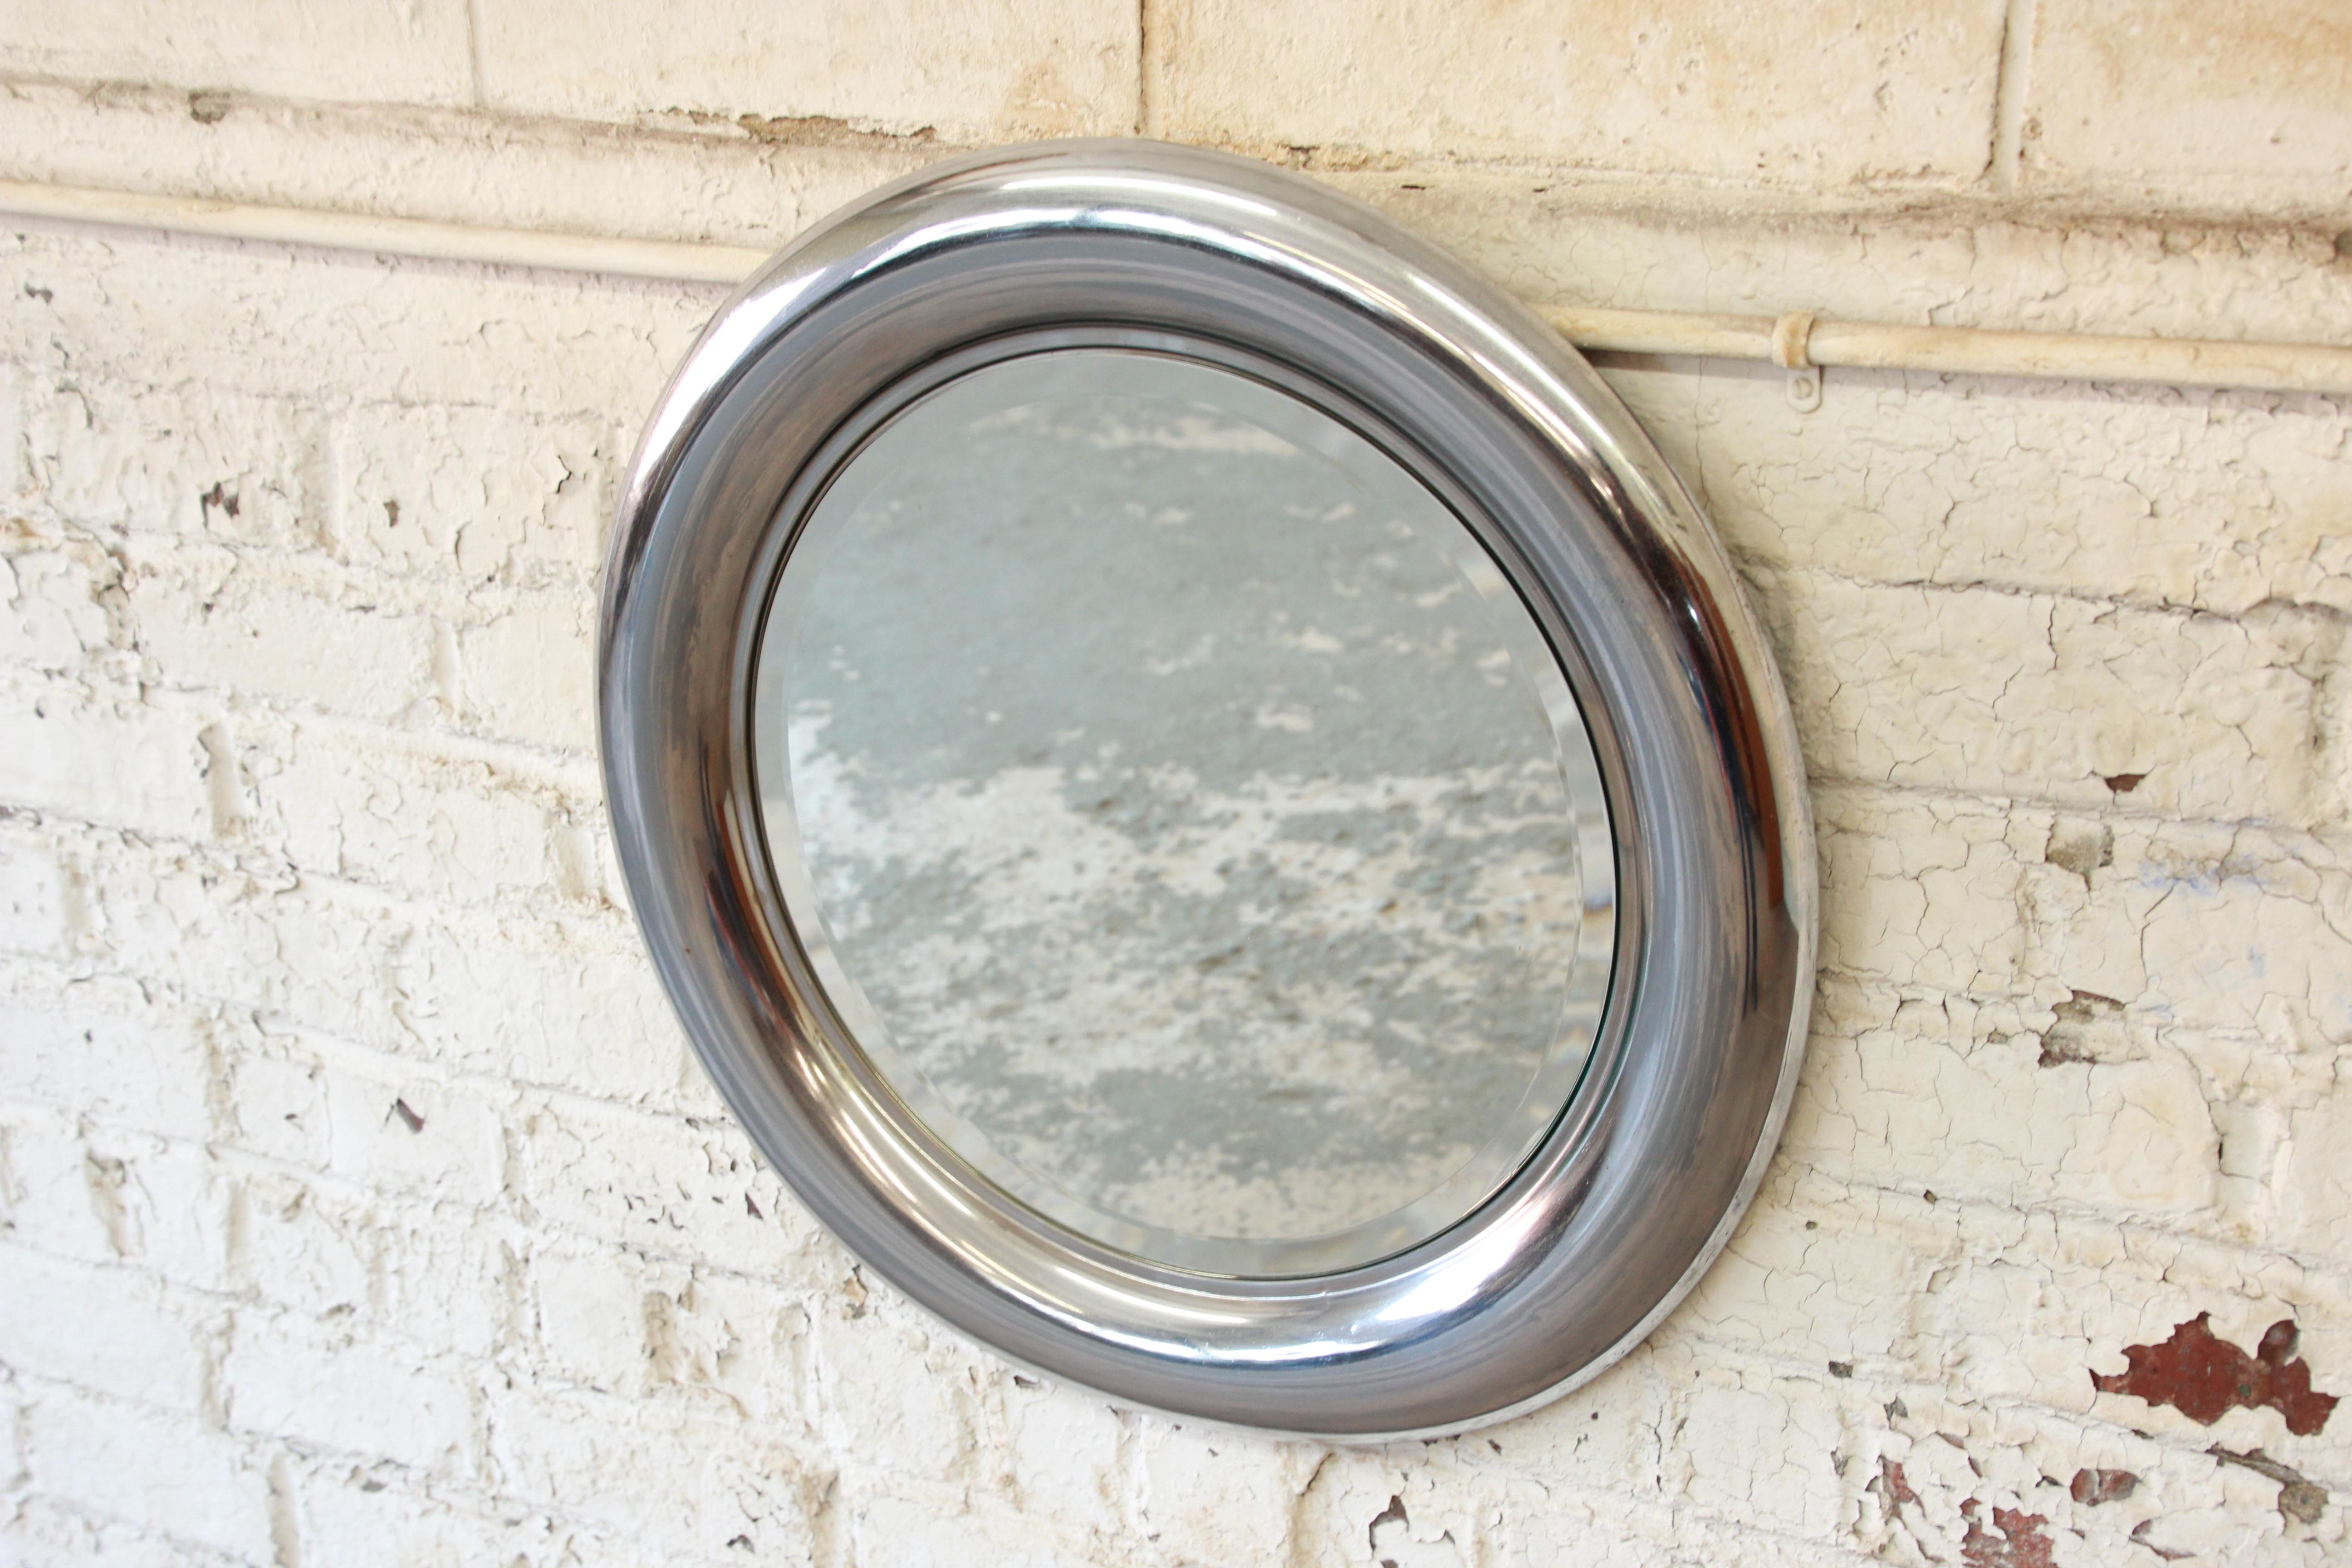 A gorgeous Mid-Century Modern round mirror produced in Italy by Reggiani. The mirror features a nice bevelled edge and a chromed metal frame. The mirror is in good original condition, with minor wear and patina from age.